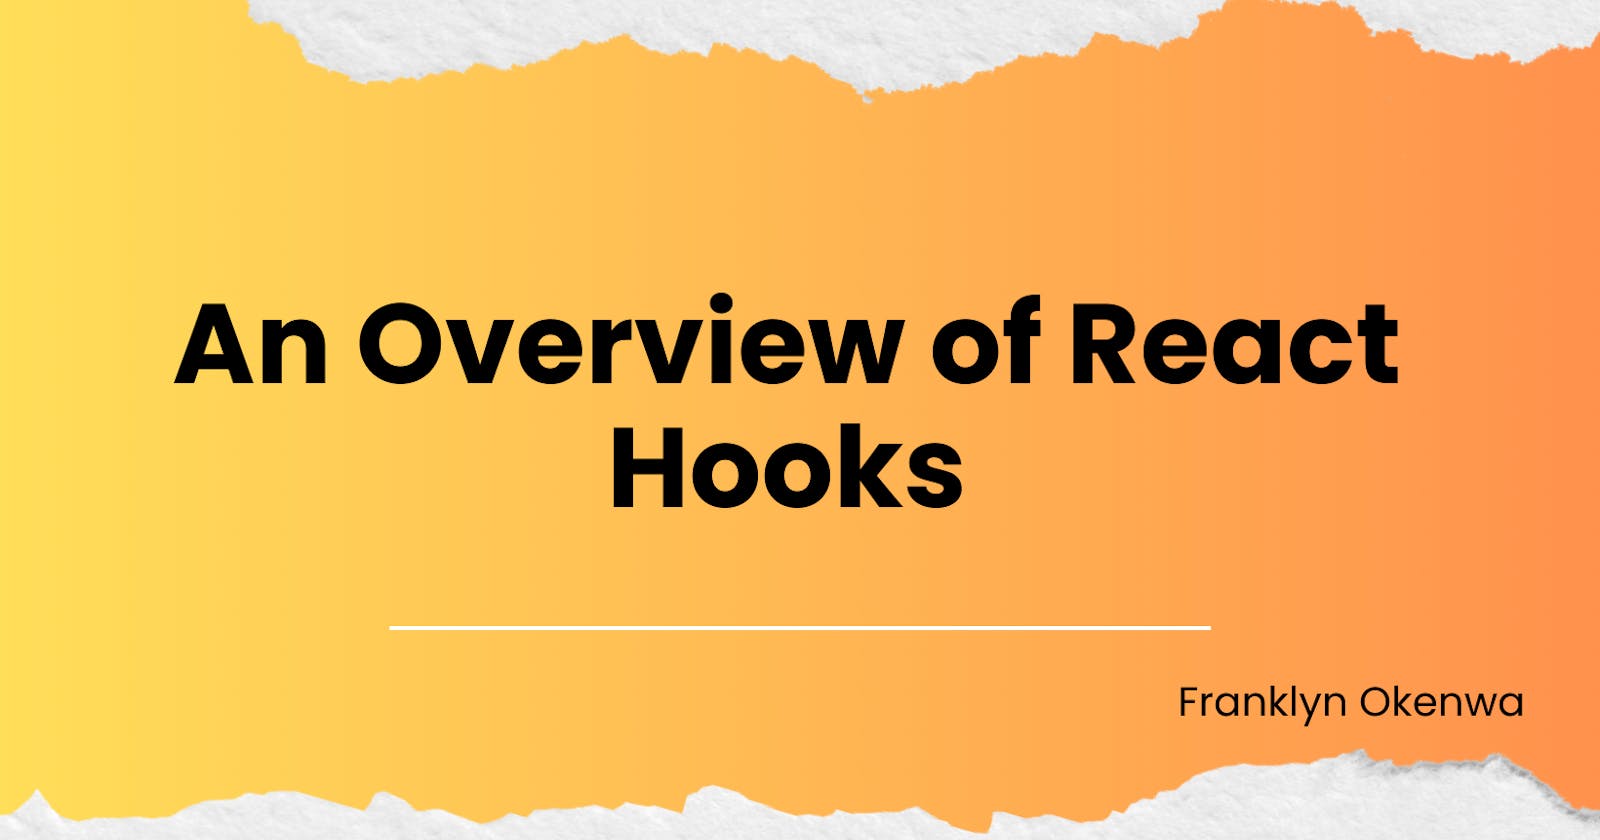 An Overview of React Hooks